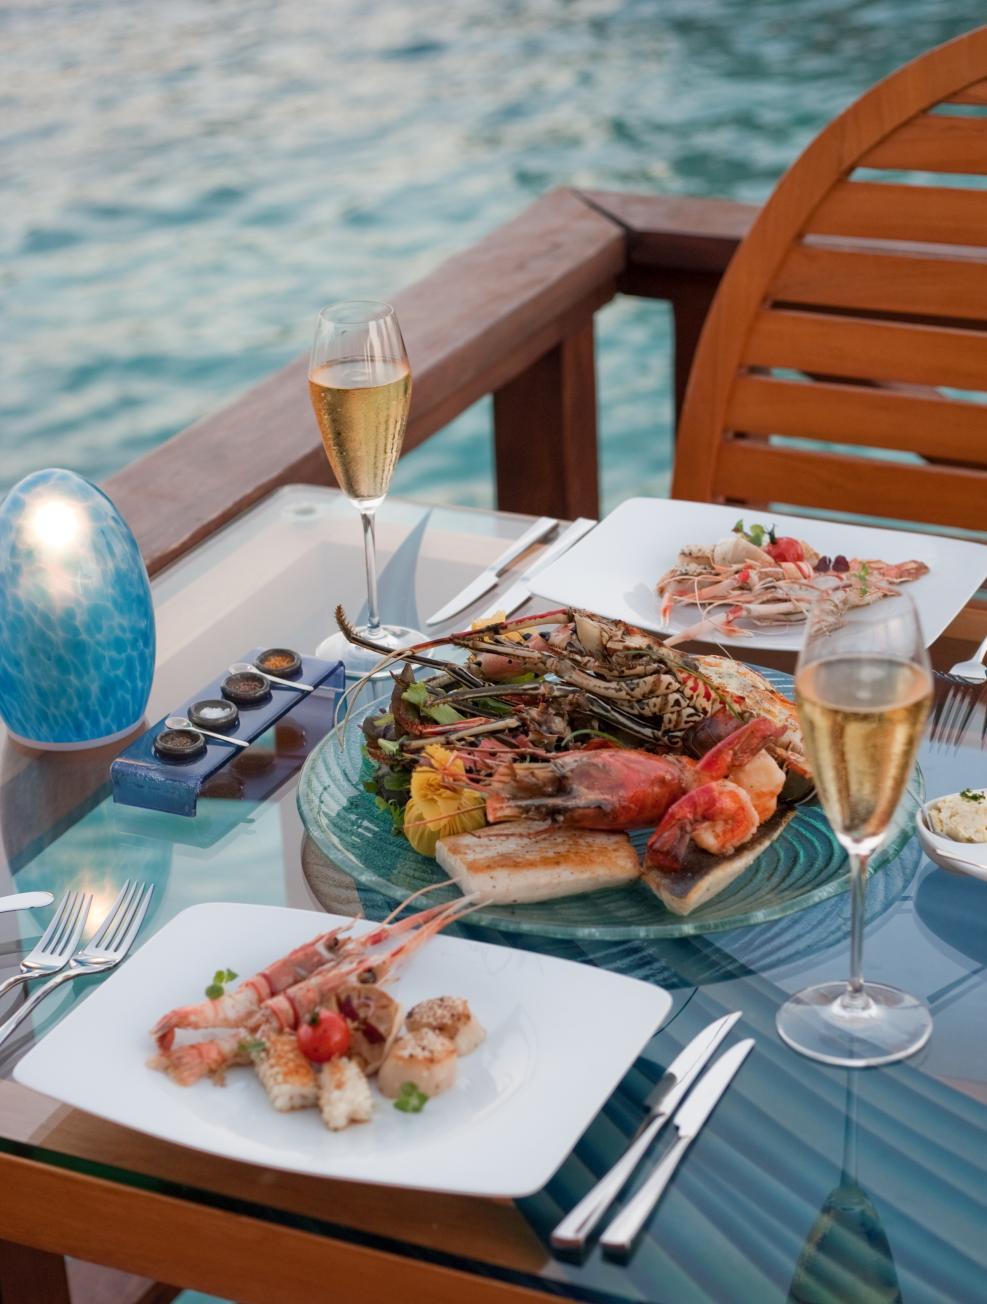 BACK TO PLATTERS FOR TWO GRILLED SEAFOOD WHOLE MALDIVIAN LOBSTER, SRI LANKAN WATER PRAWNS, FRESH SEA SCALLOP, KING FISH, SEA BASS FILLET, LANGOUSTINES, CALAMARI AND